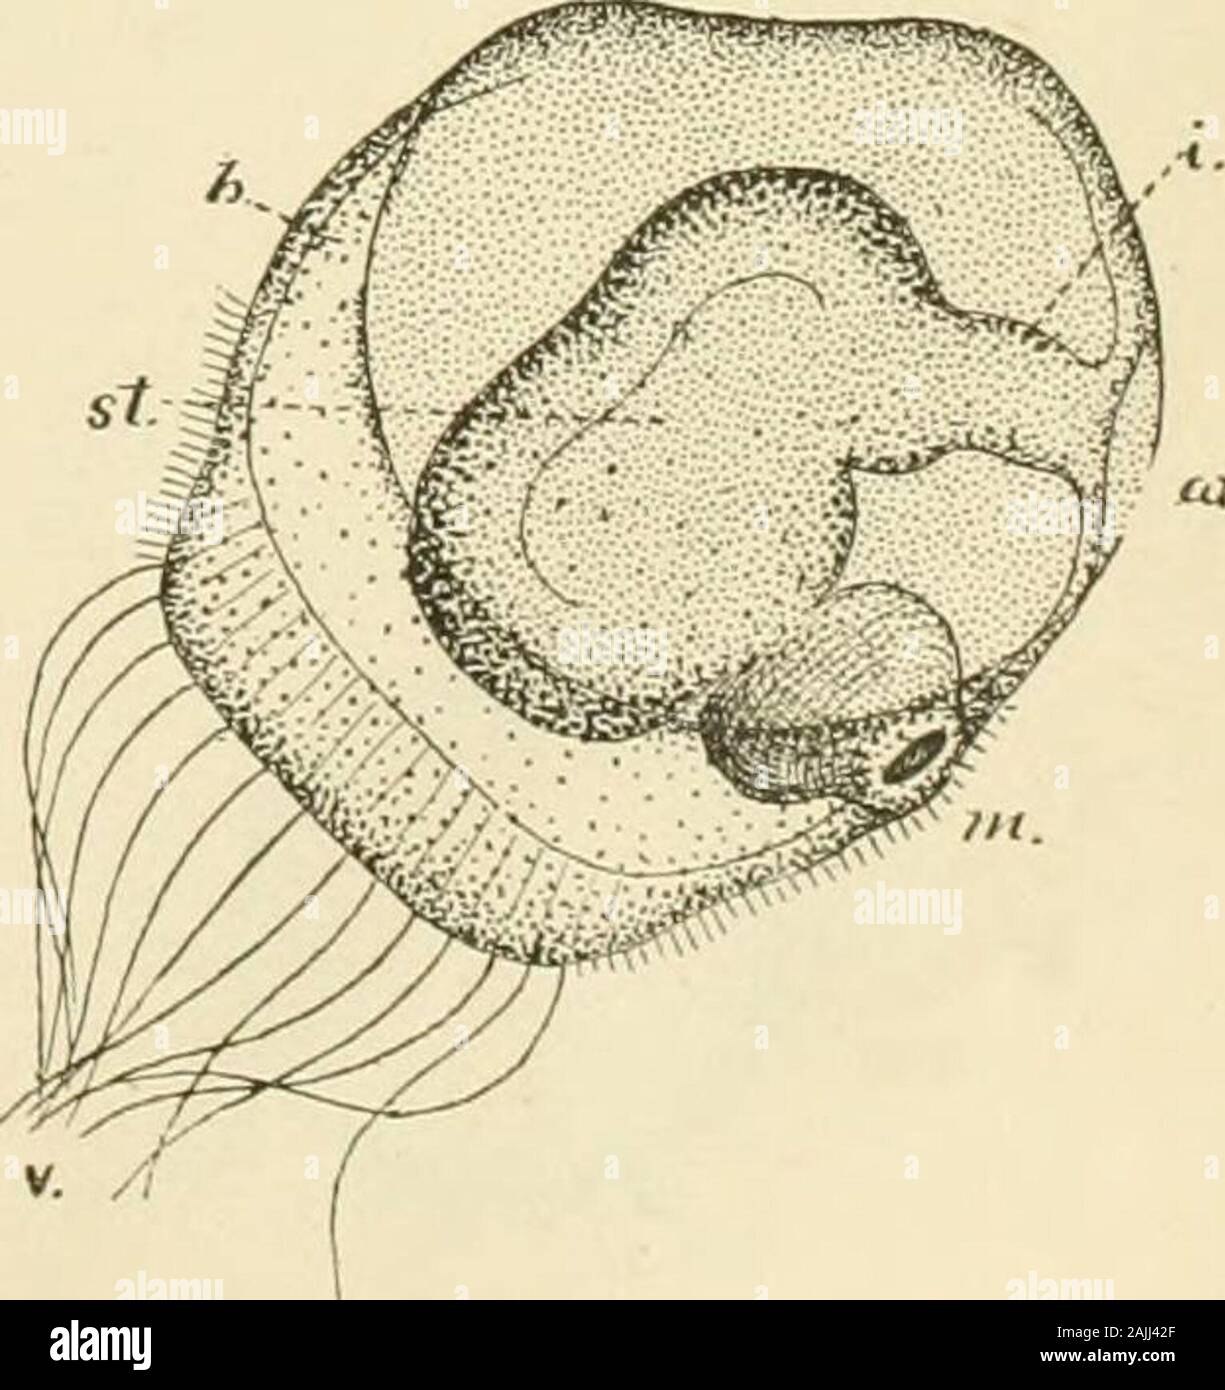 The oyster industry . Fig. 40. Fijr. 41. Fi.r. 42. Figures of tlio egg of the oy.ster ami tlie young oyster in progressive stages of growth, illustrating the studies of Dr. V. K. Brooks. IFnini llic report uf T. B. Ferguson, lonimissioncr ul tialieries for Maiylaiiil.J Plate XL. Monograph- O VSTER- IJVD USTR F. Stock Photo